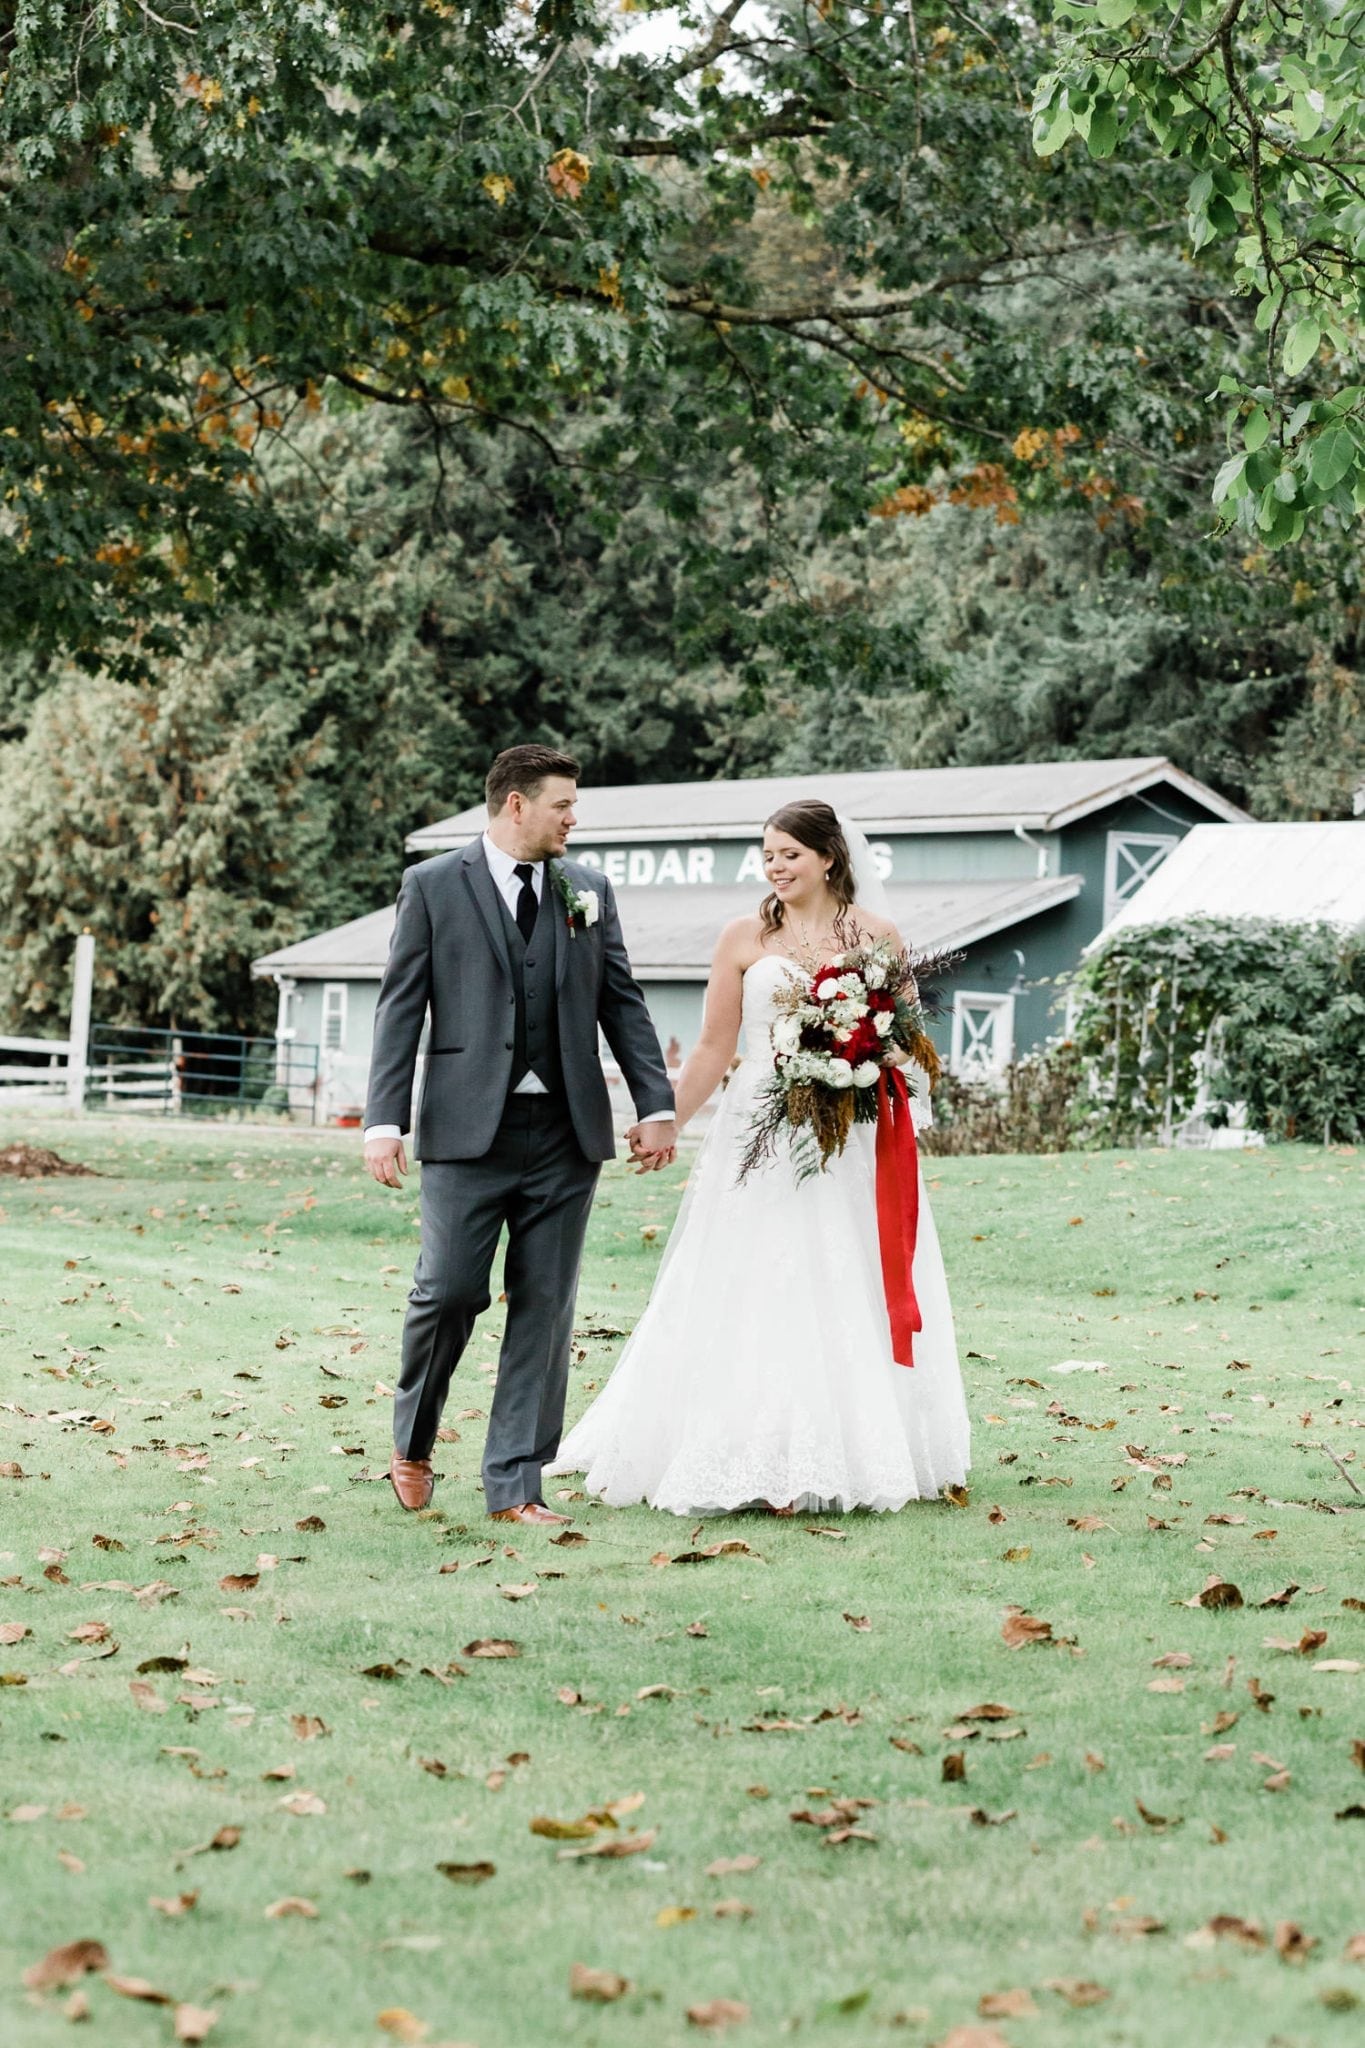 Rustic backyard wedding picture with bride and groom | Vancouver wedding photographer